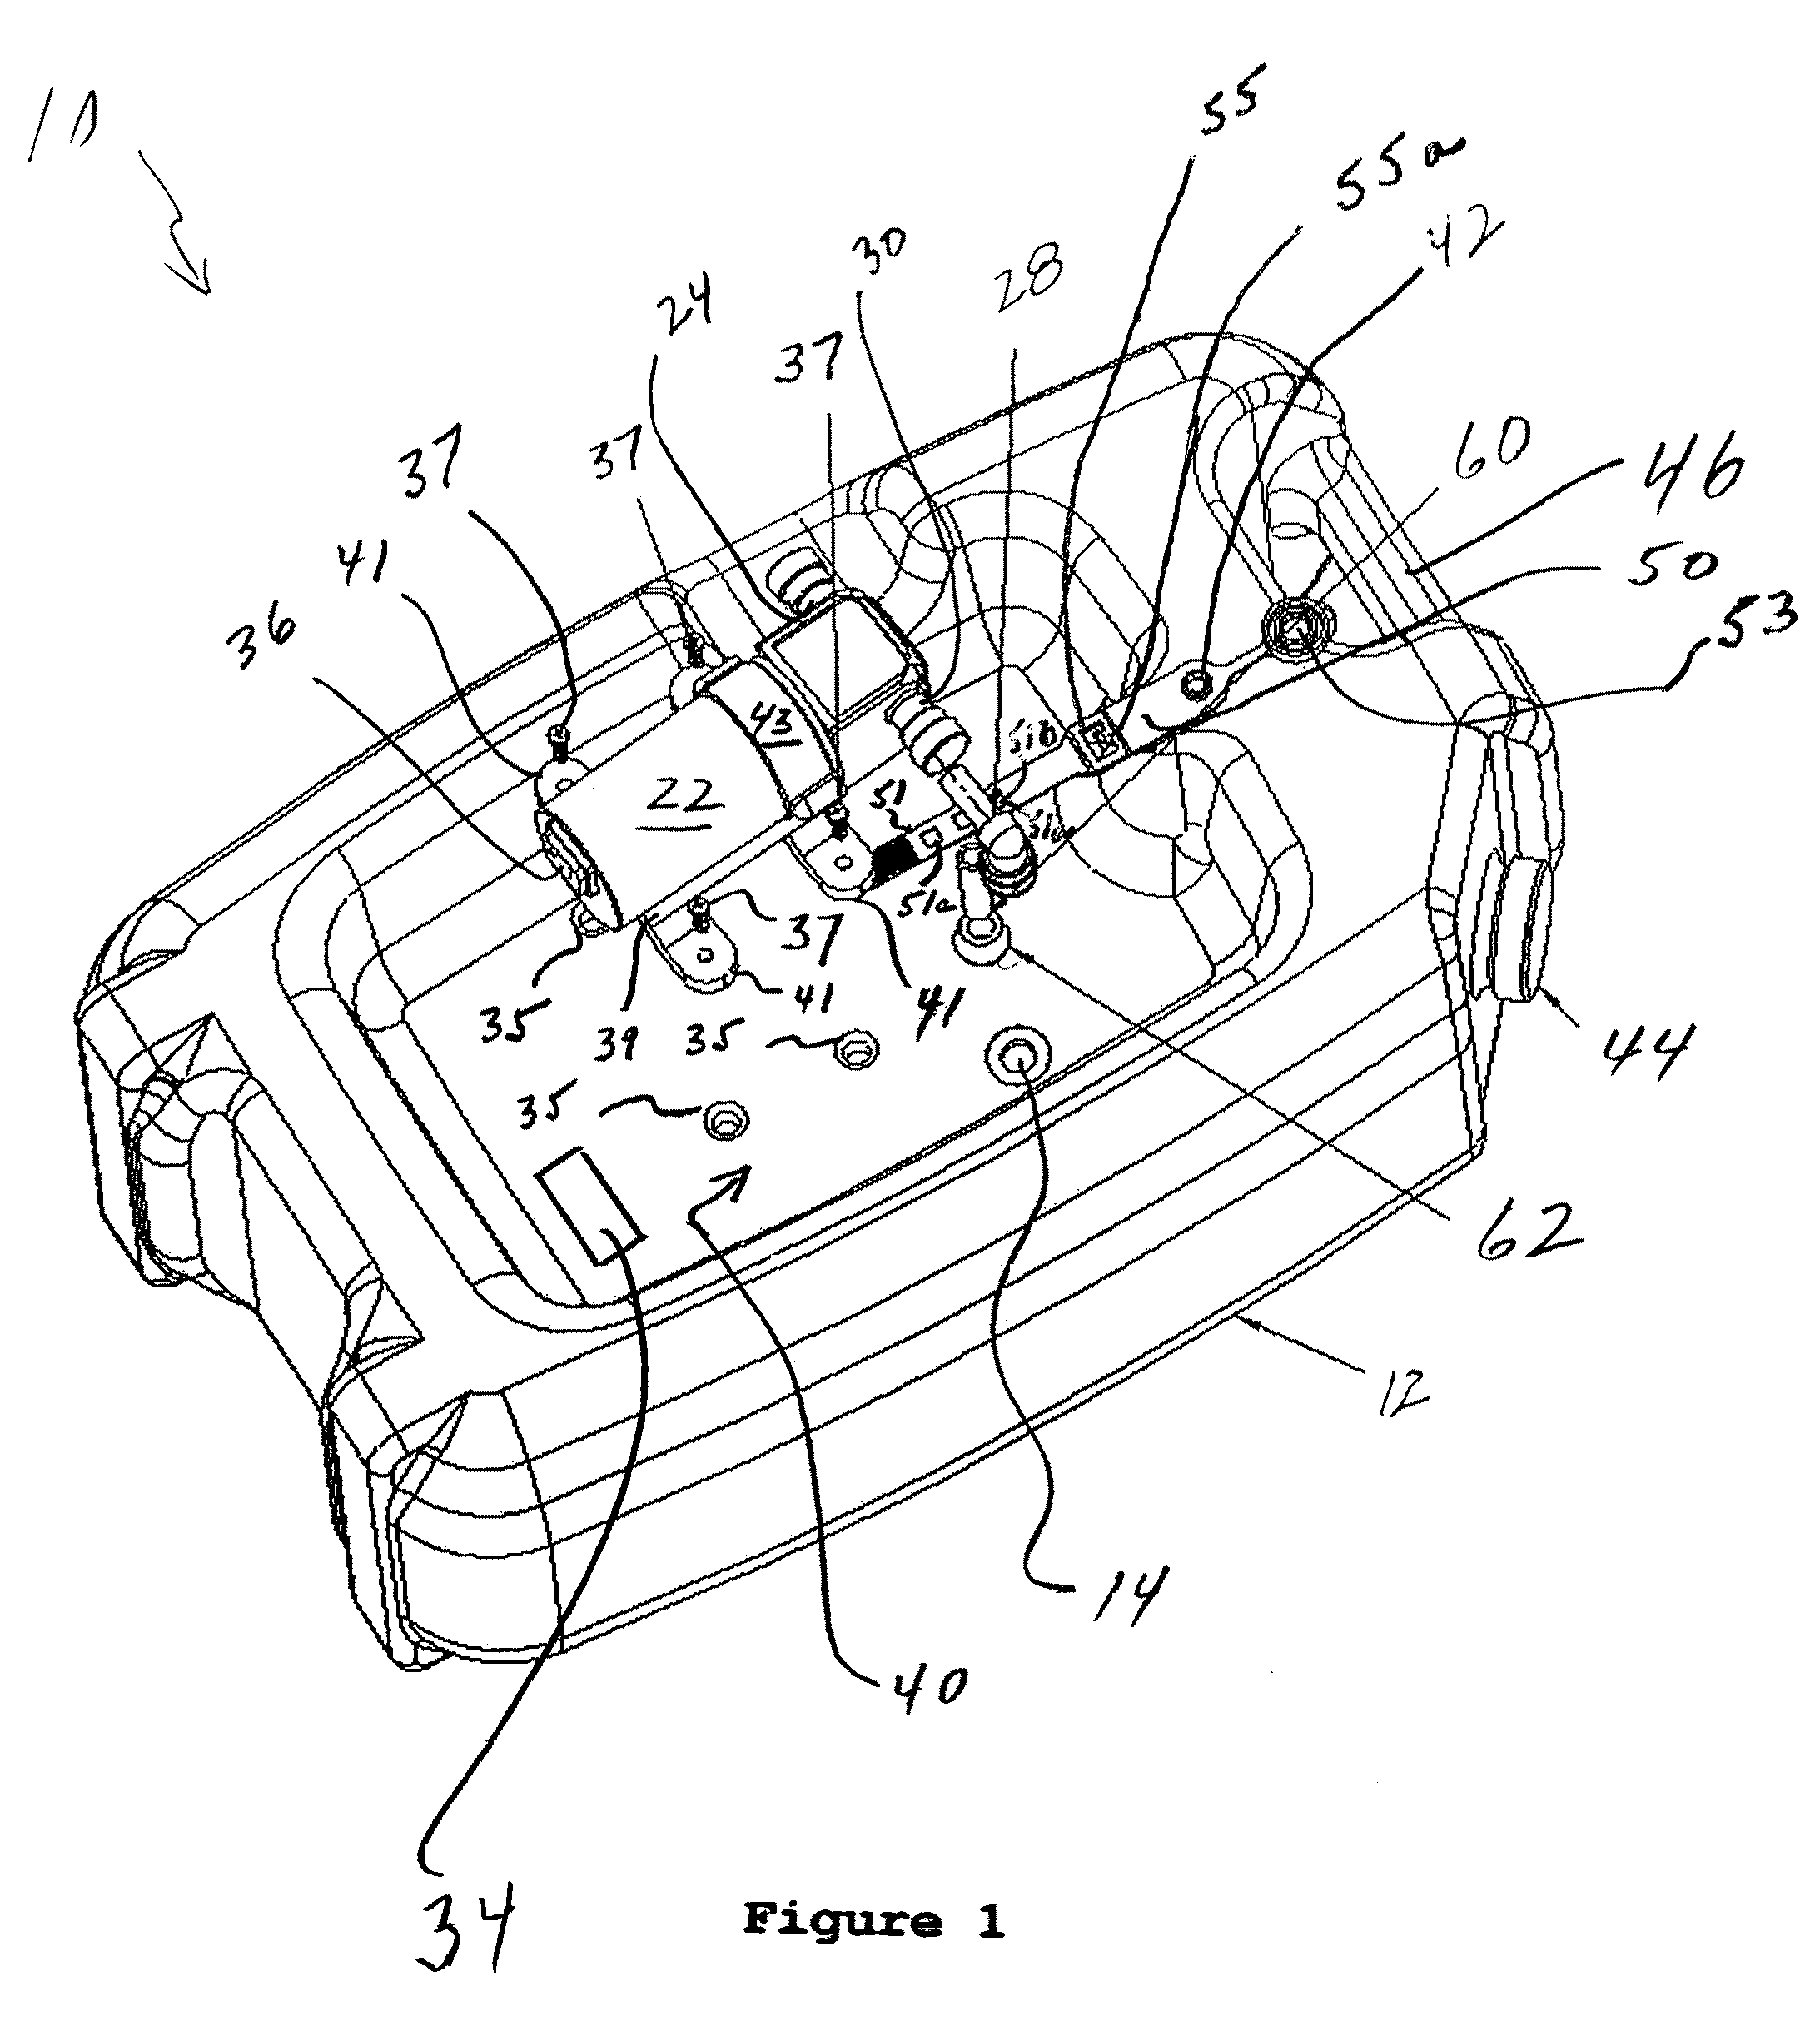 Portable self-contained fluid system